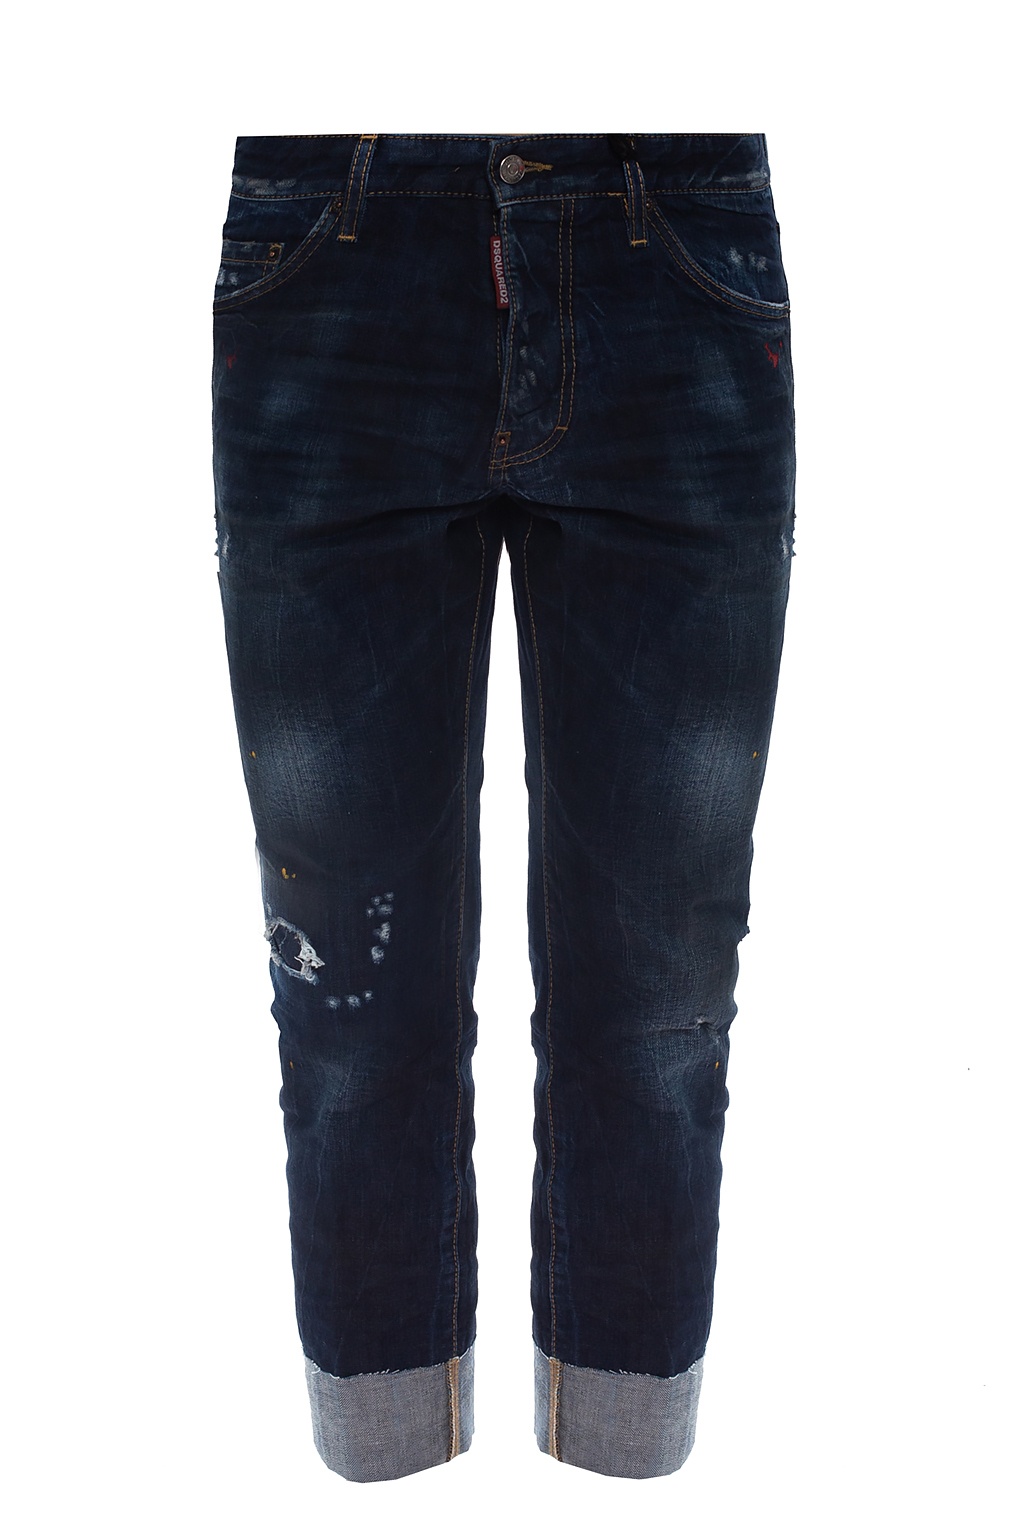 Dsquared2 'Cool Guy Cropped' jeans | Circular Knit Midi Pants 